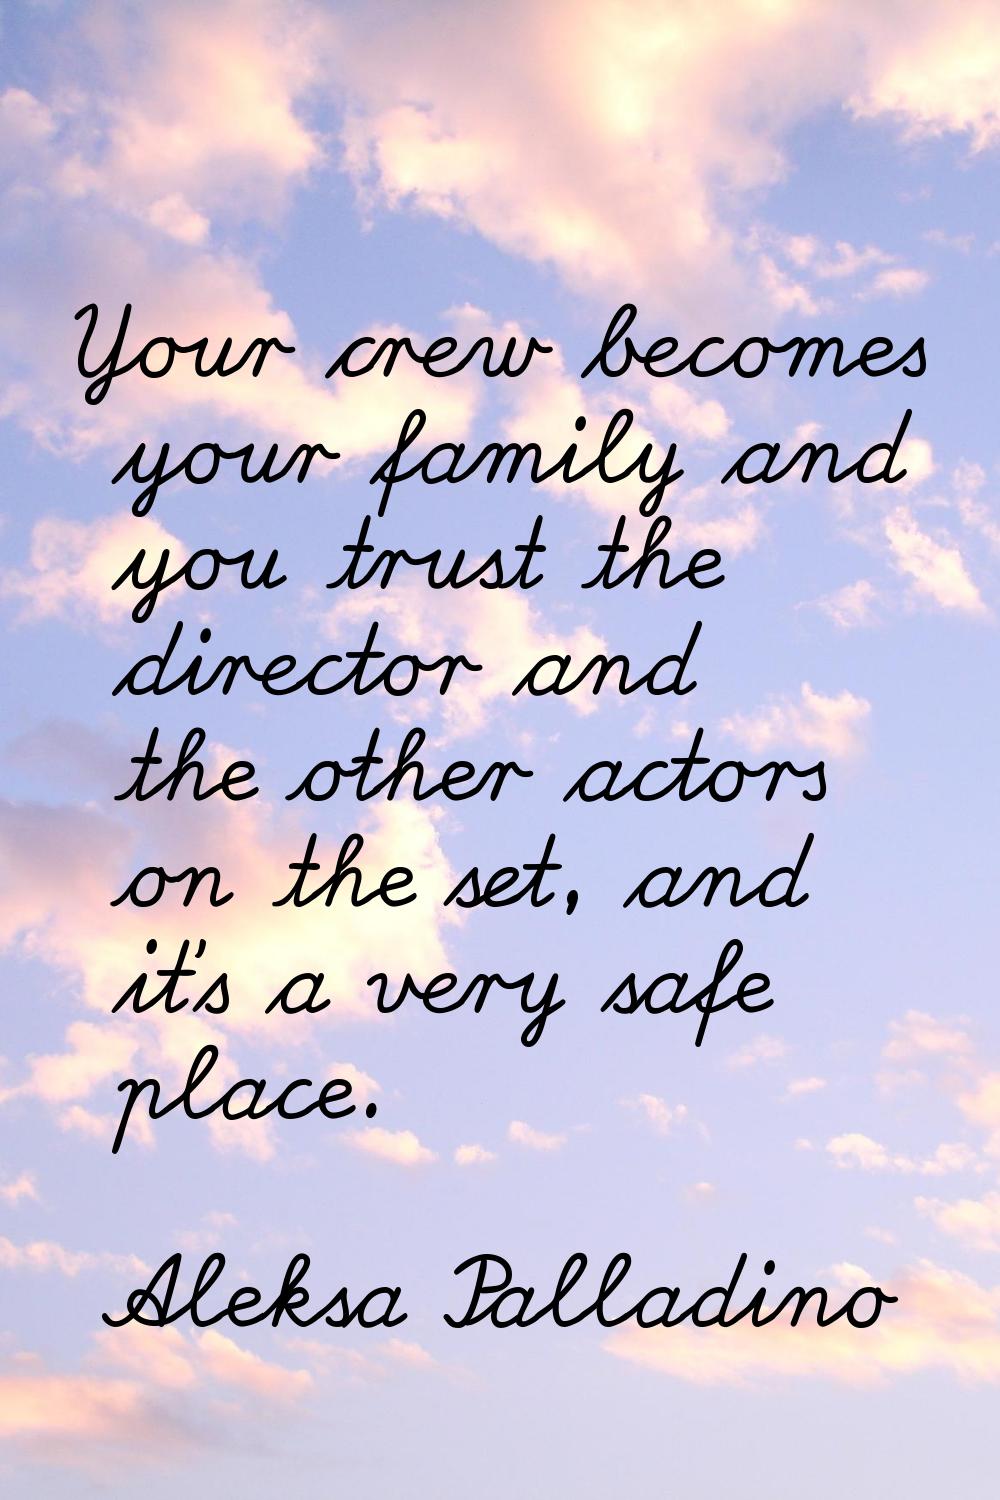 Your crew becomes your family and you trust the director and the other actors on the set, and it's 